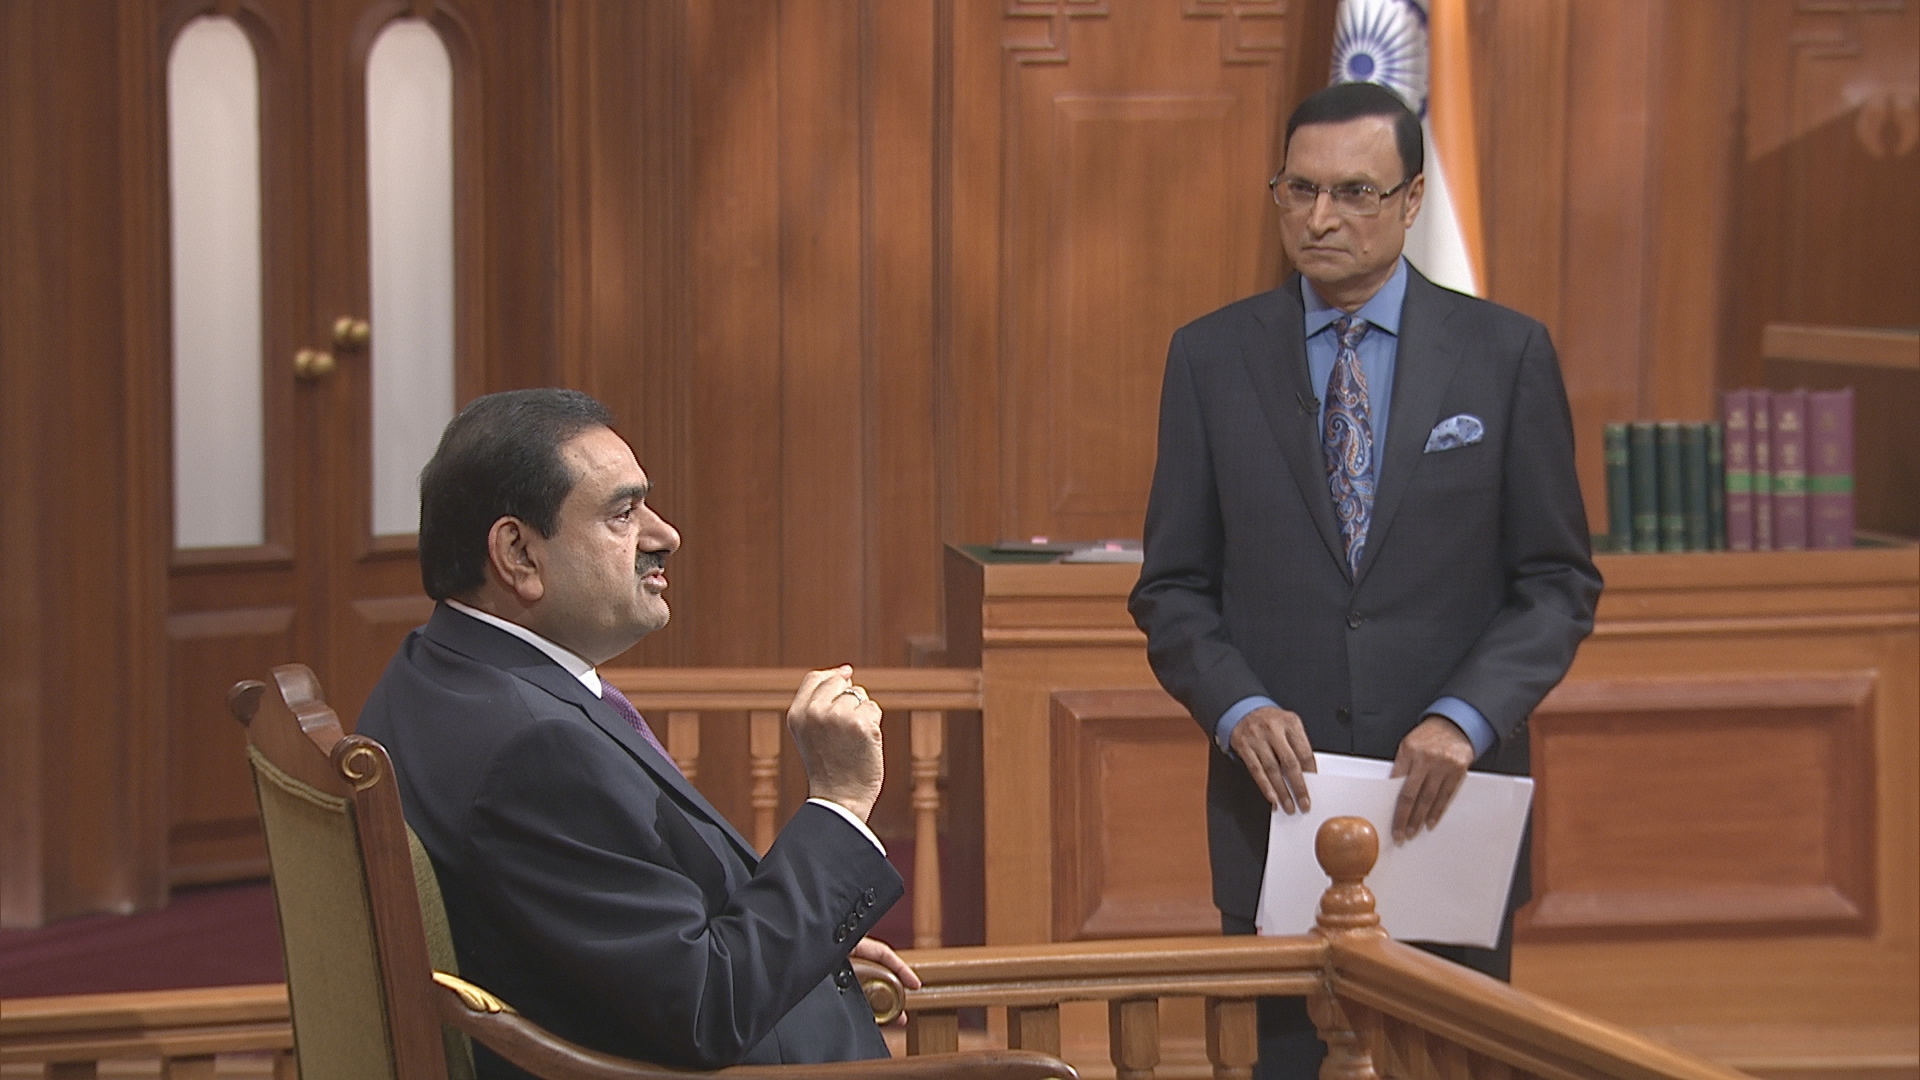 You are currently viewing Asia’s richest industrialist Gautam Adani will be in the dock of Rajat Sharma’s iconic show “Aap Ki Adalat” on January 7